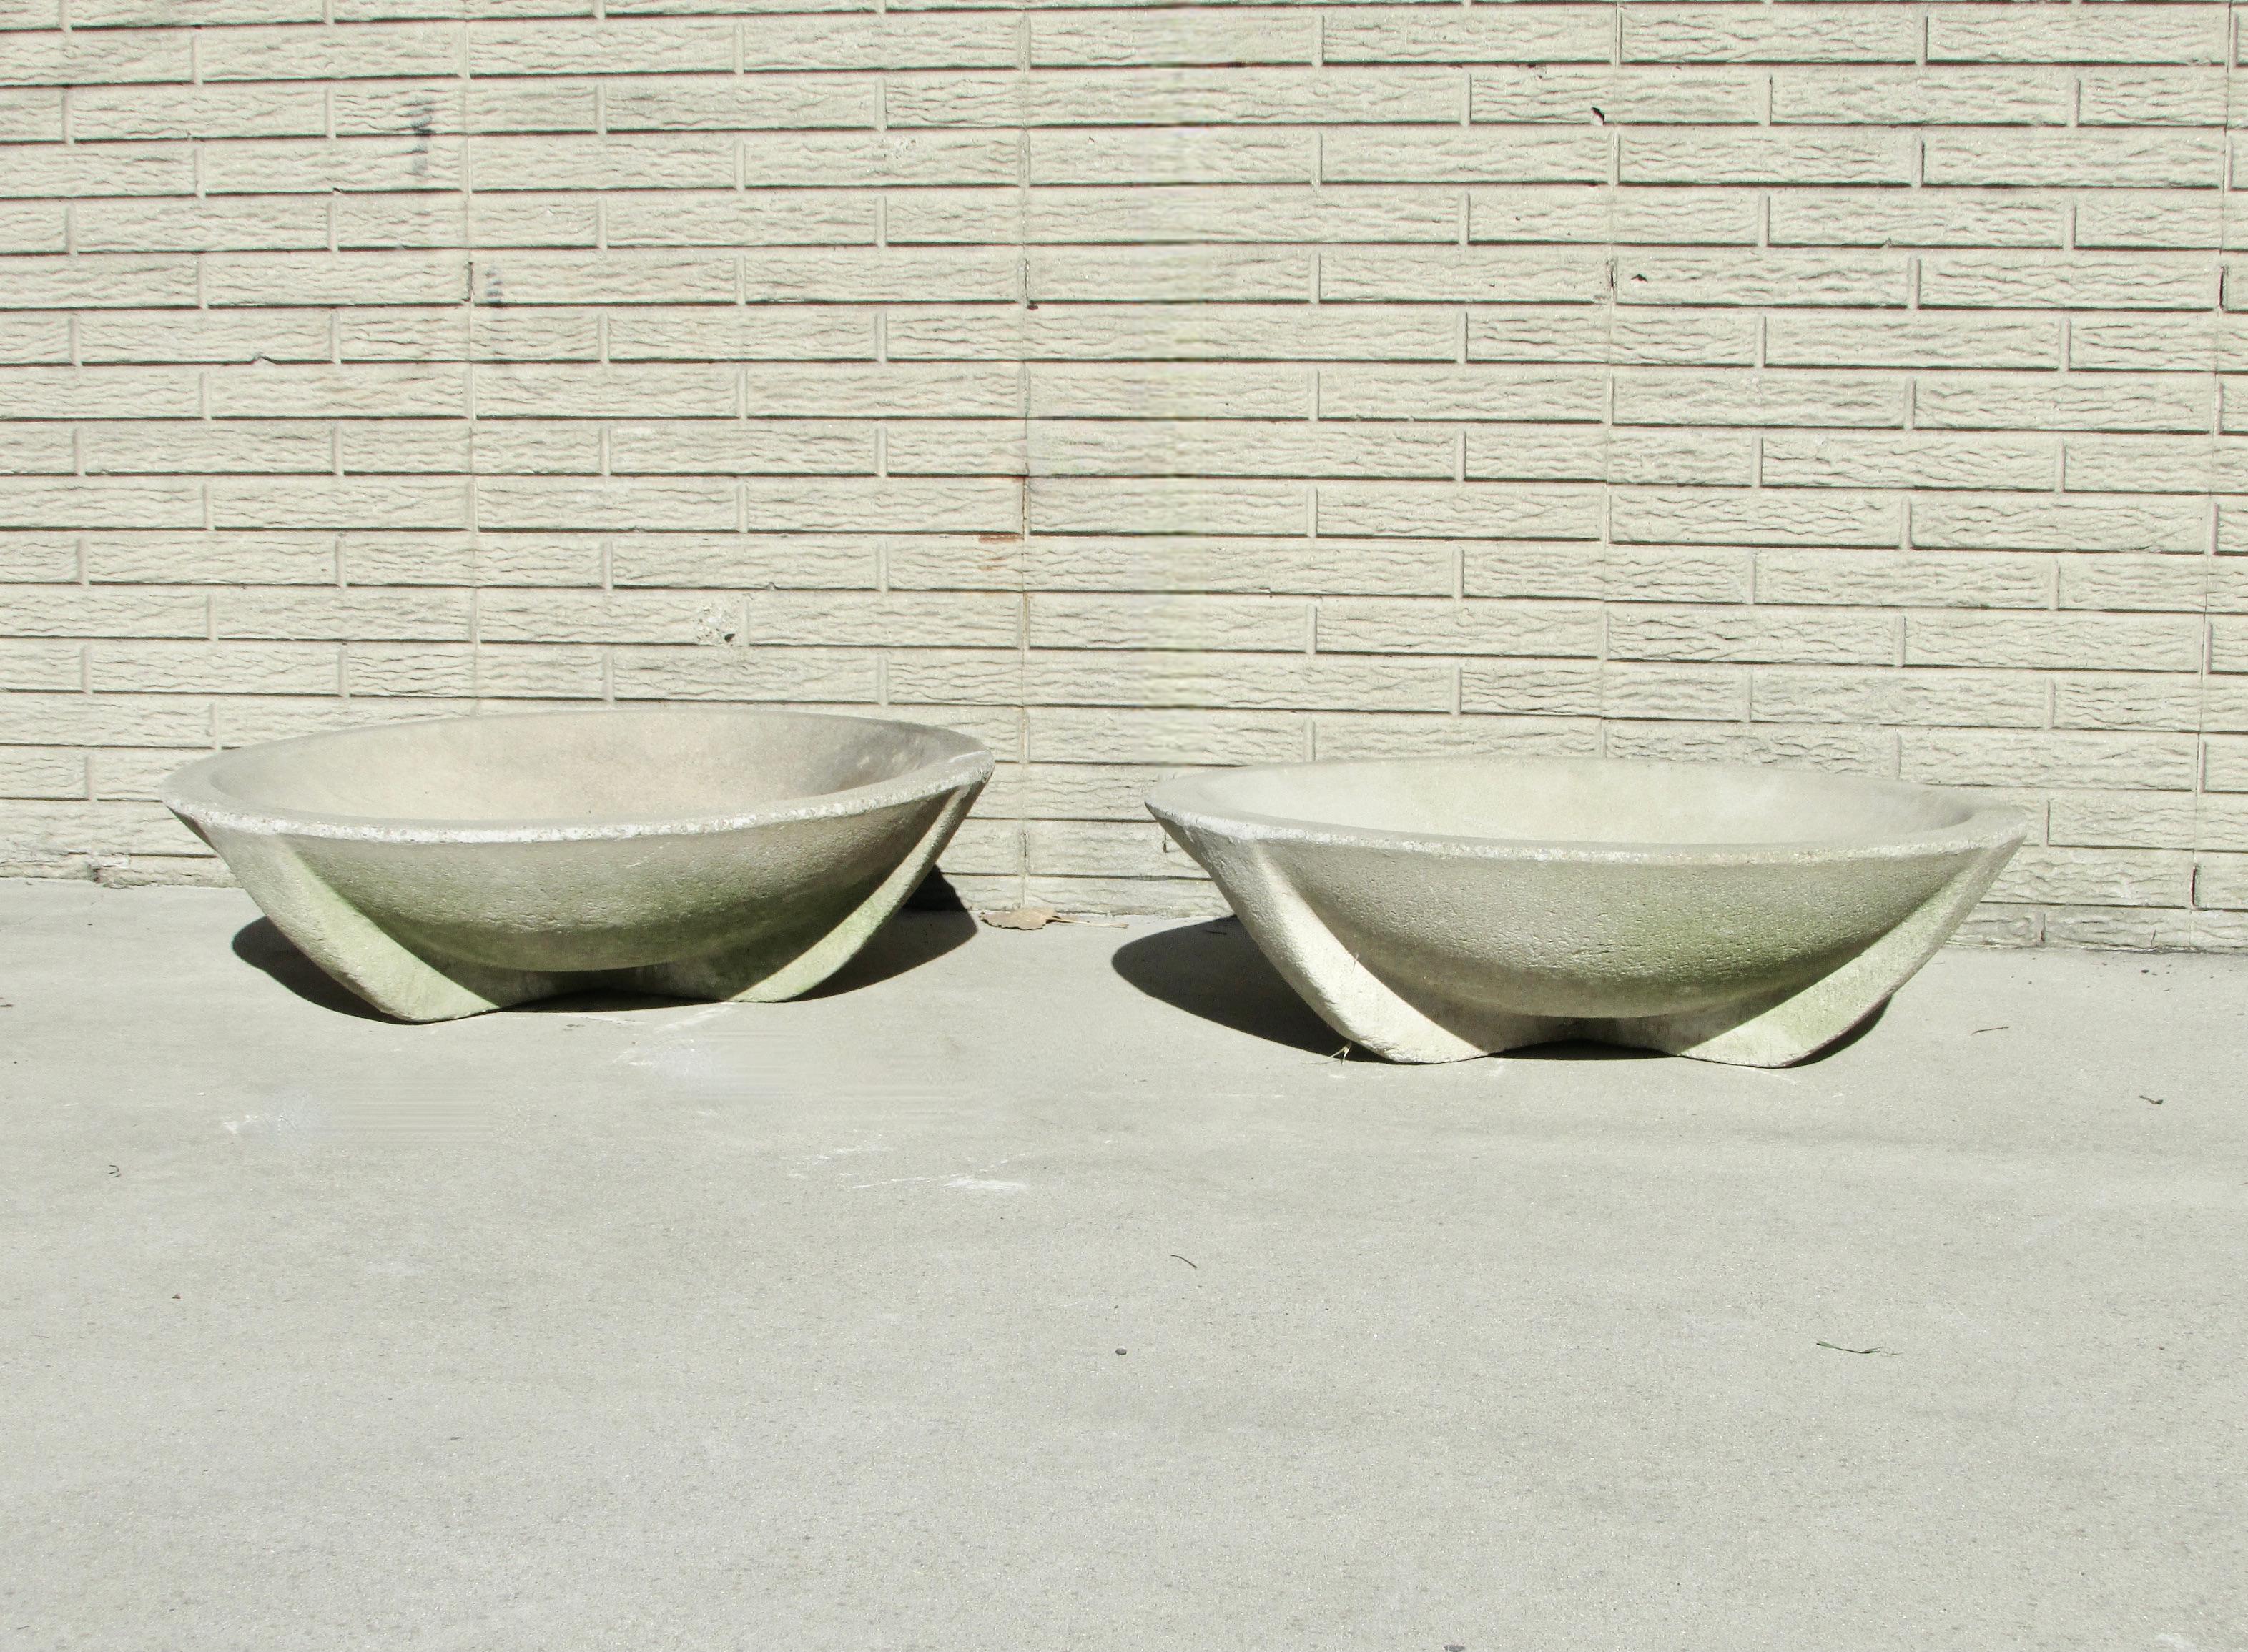 Frank Lloyd Wright Style Arts and Crafts Prairie School Cement Planter Pots In Good Condition For Sale In Ferndale, MI